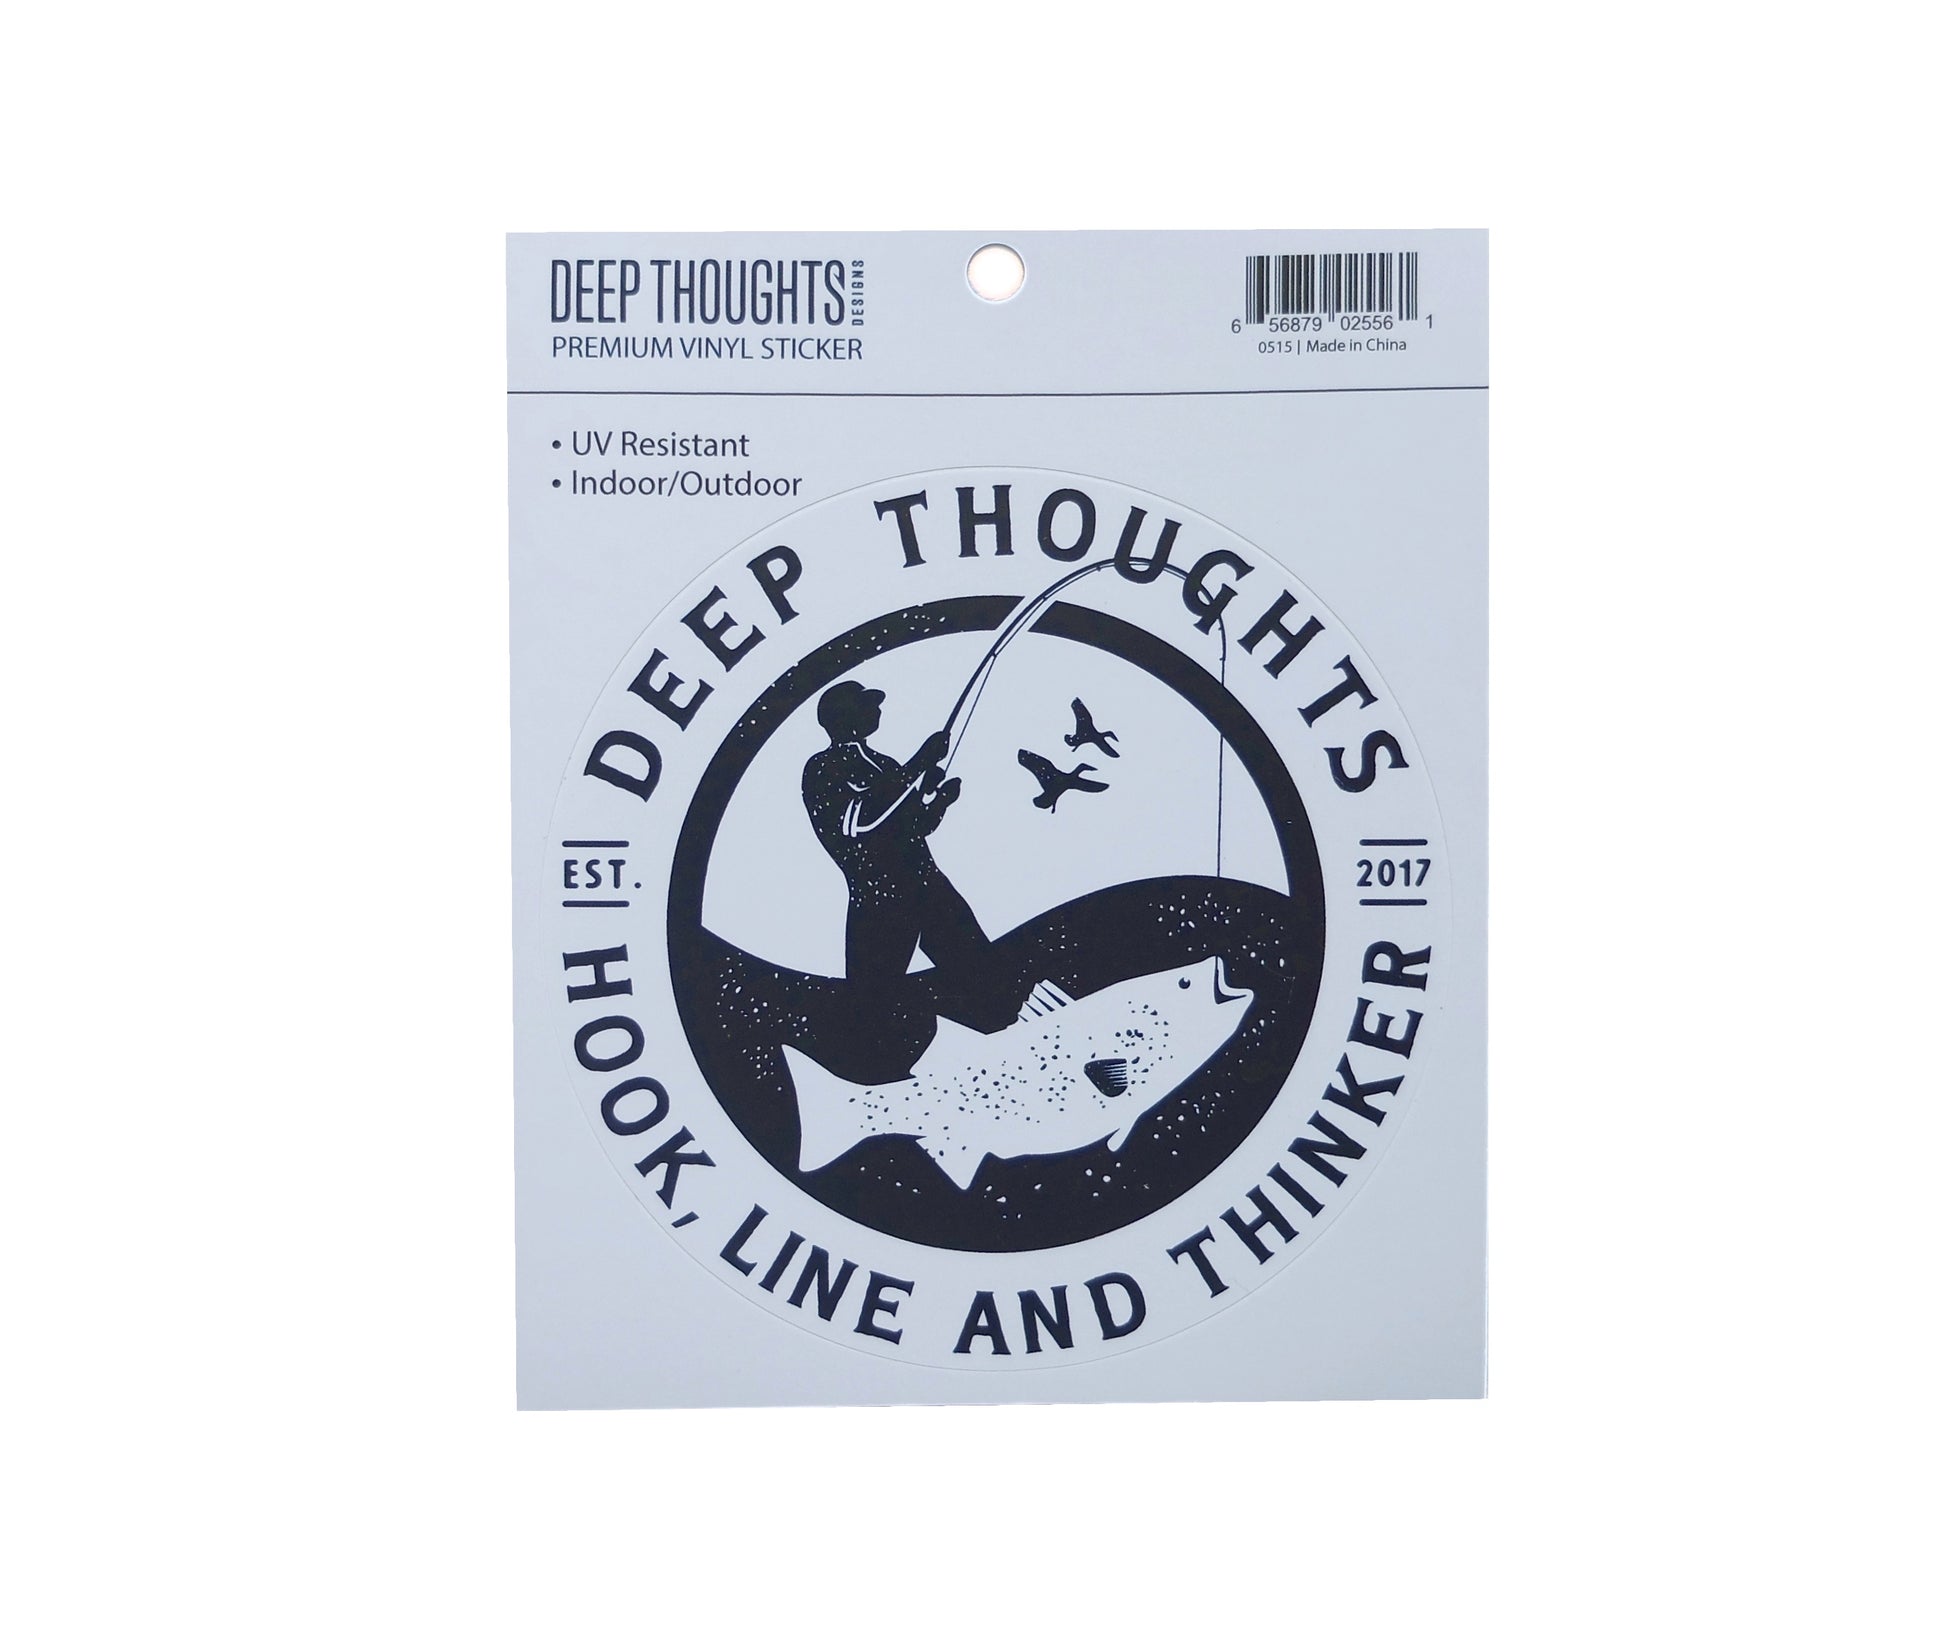 Deep Thoughts Designs round vinyl sticker with navy blue and white surf fisherman logo and hook line and thinker tag line